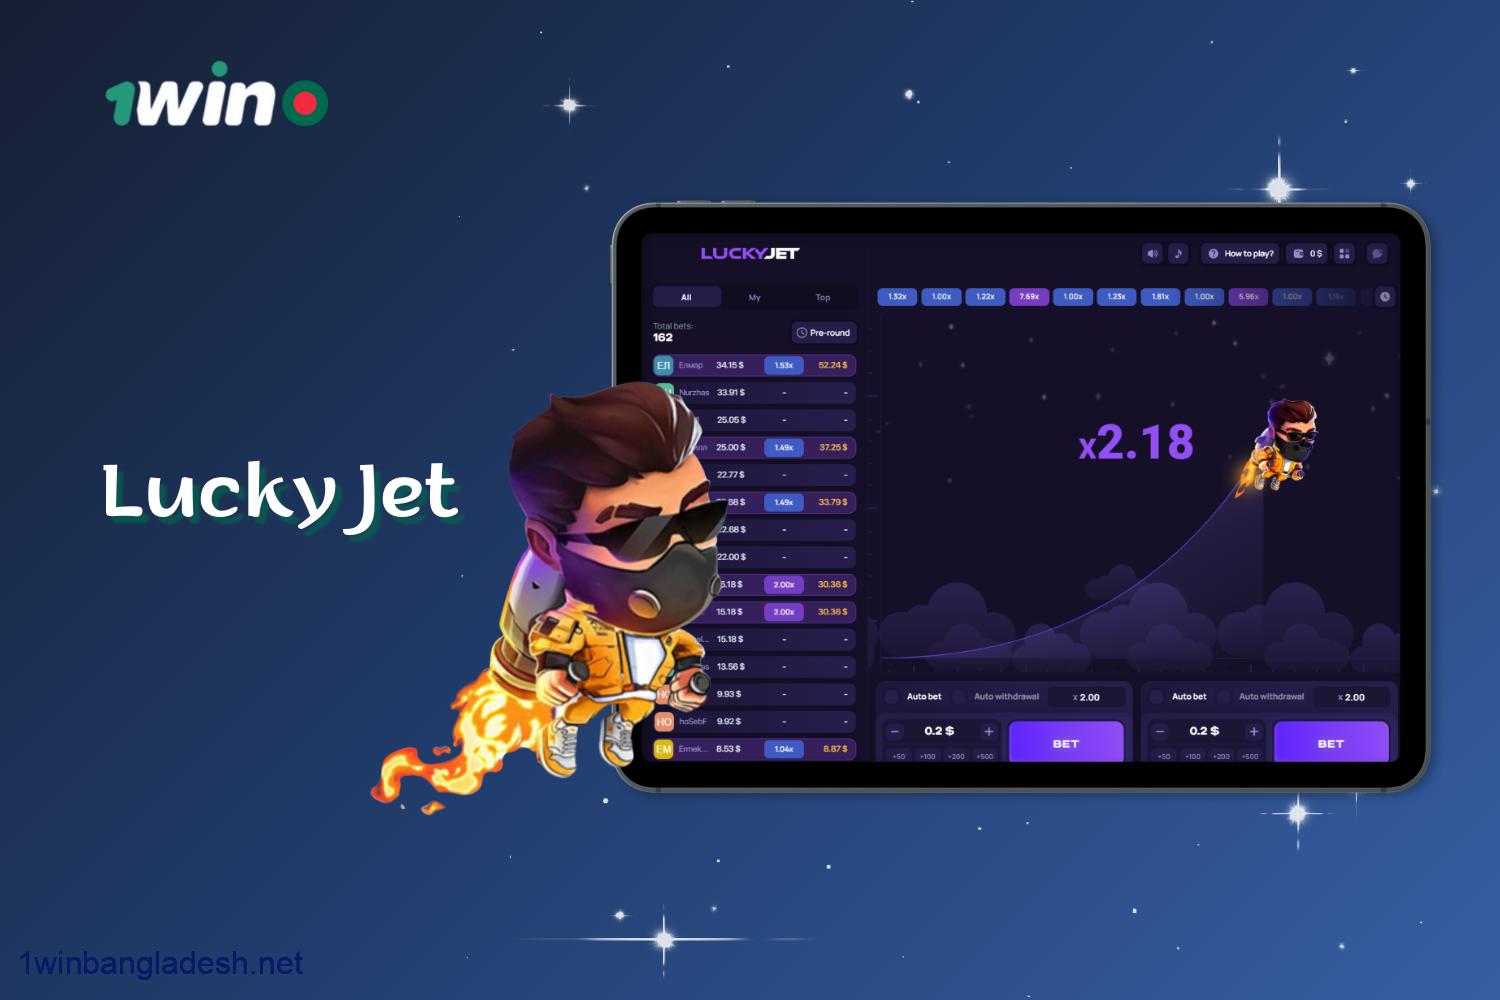 1win offers players in Bangladesh the popular game Lucky Jet